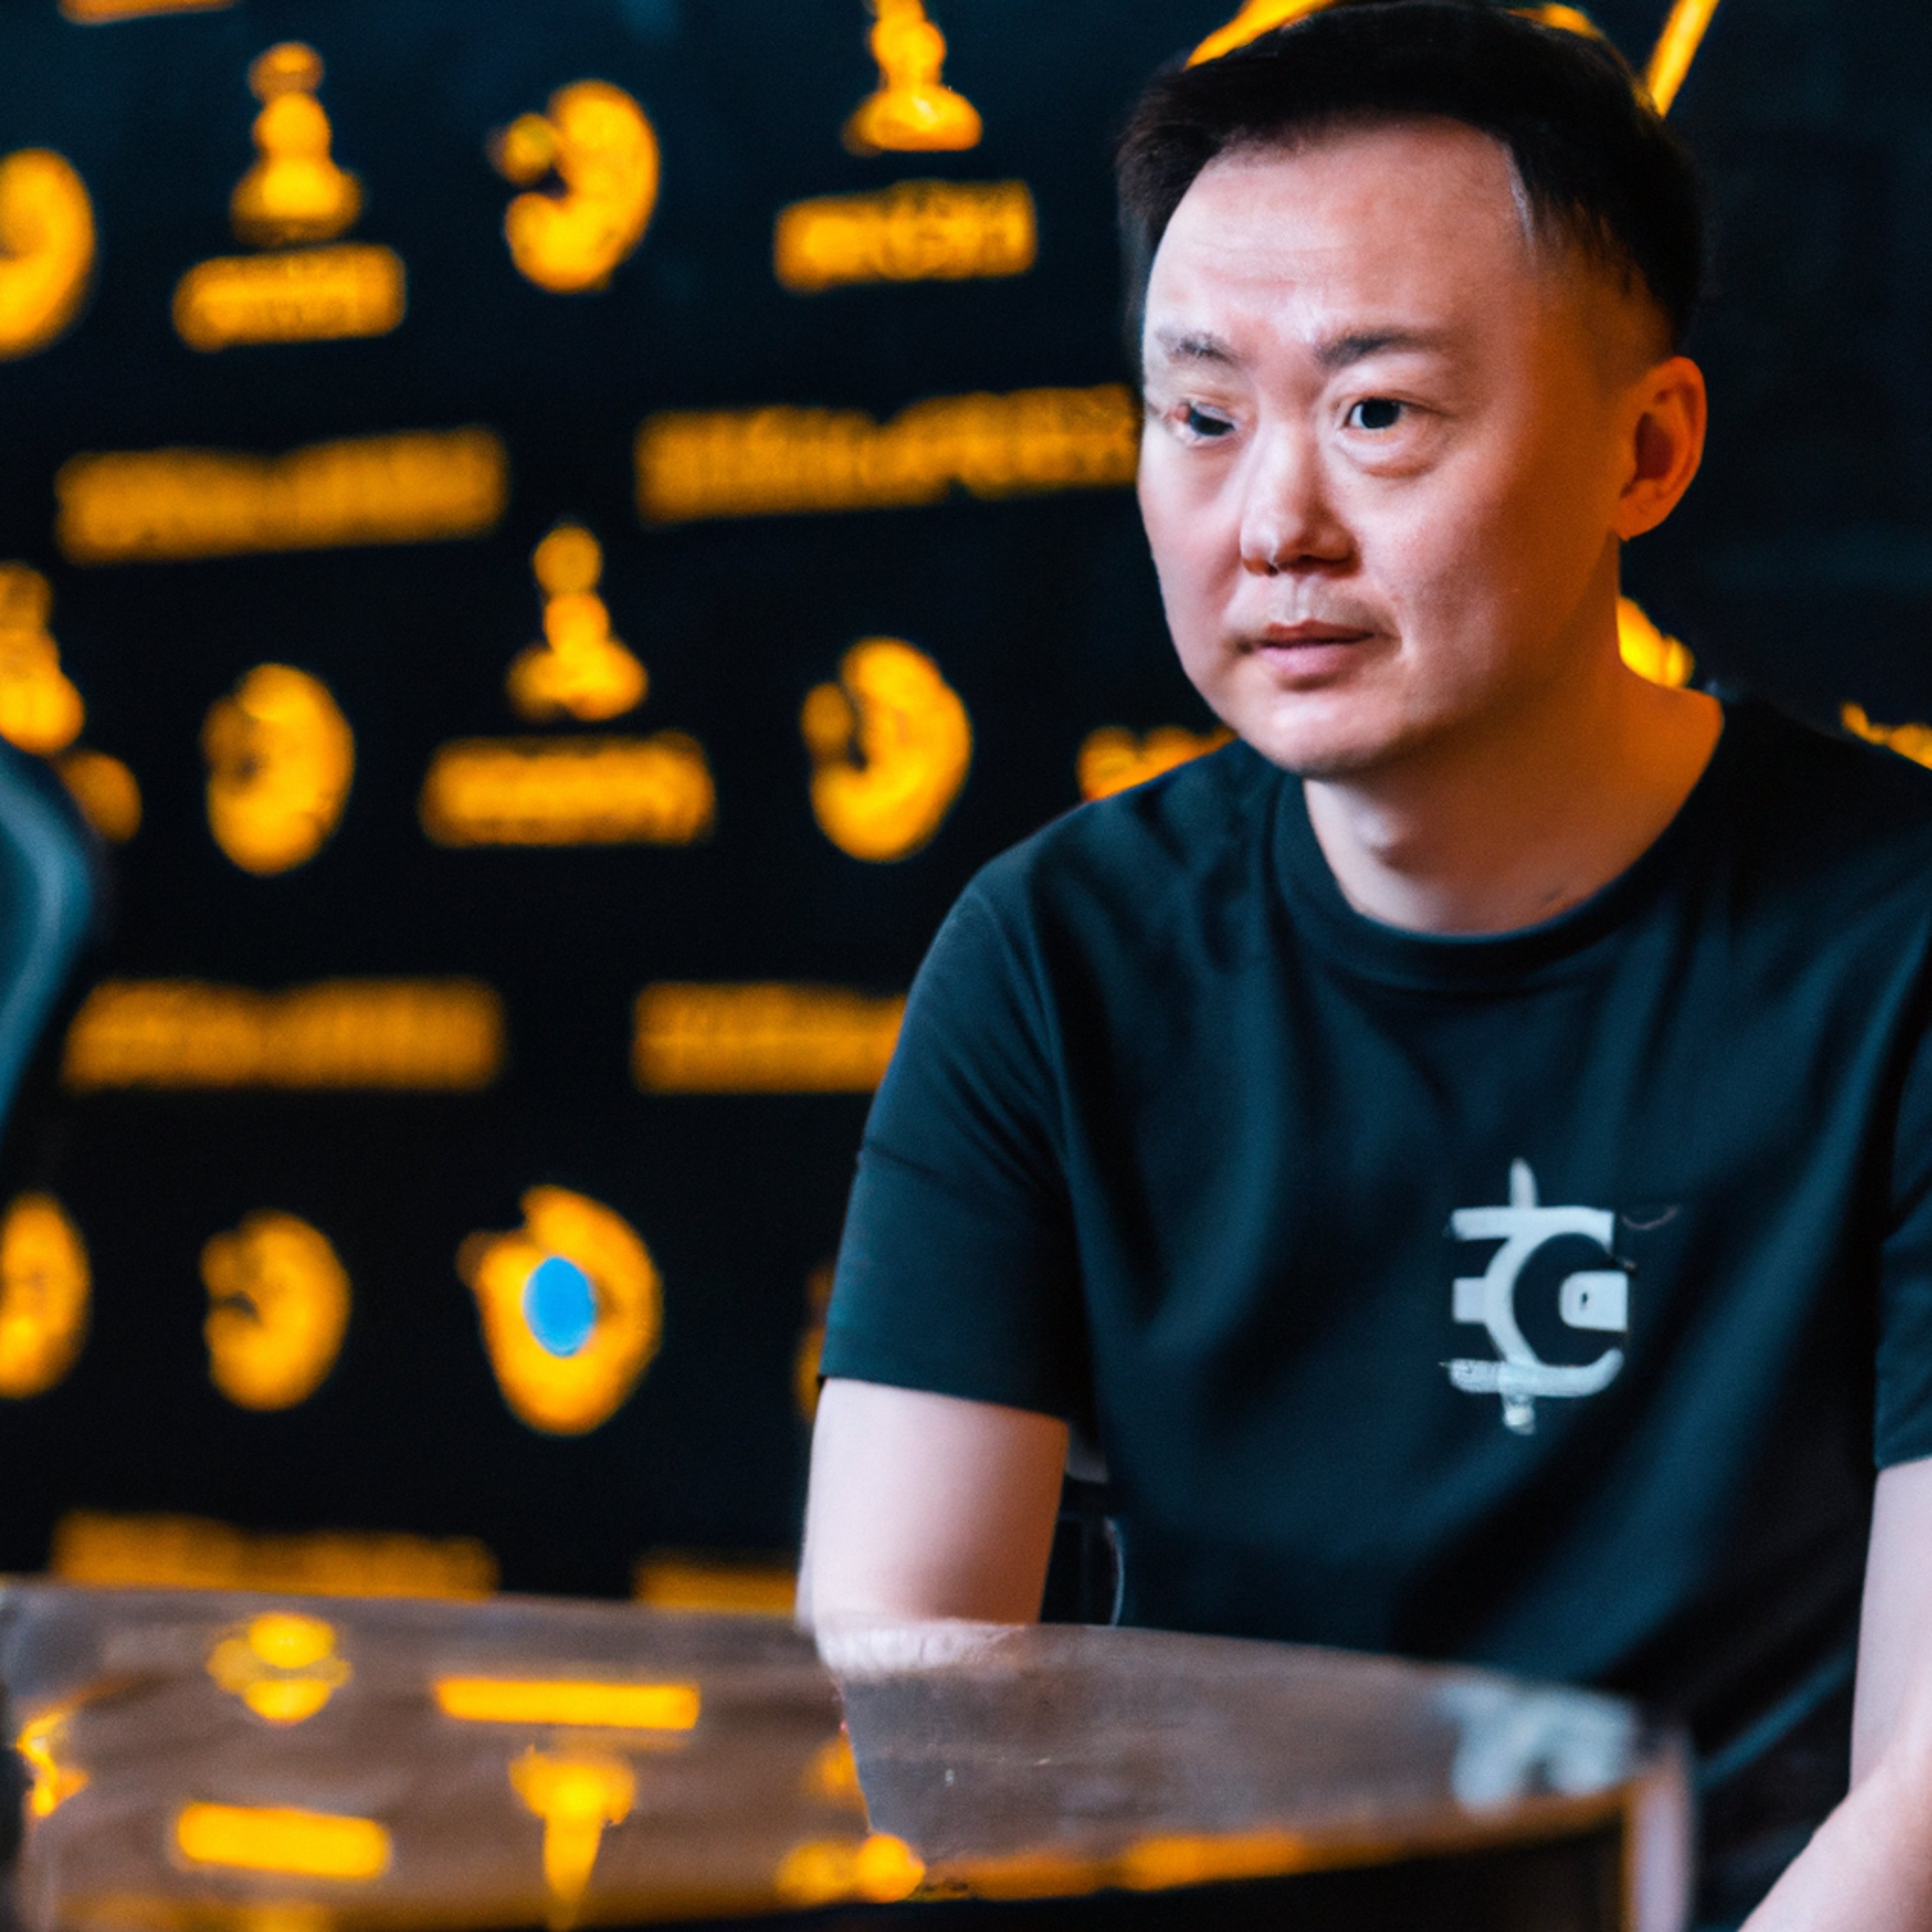 Binance CEO Changpeng Zhao Admits to Using Company Products but Says Employee Trading is Limited